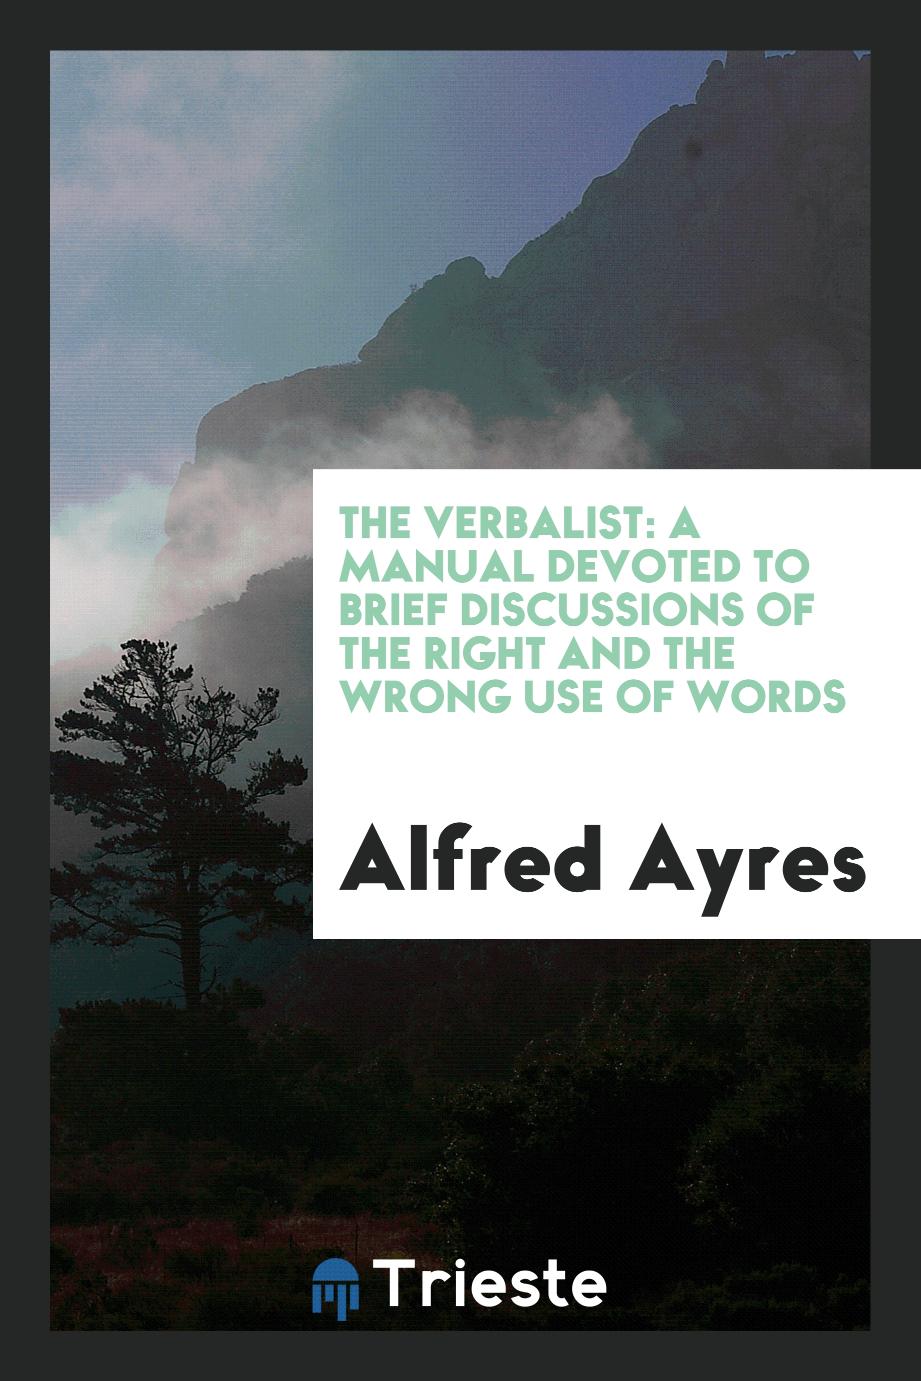 The Verbalist: A Manual Devoted to Brief Discussions of the Right and the Wrong Use of Words